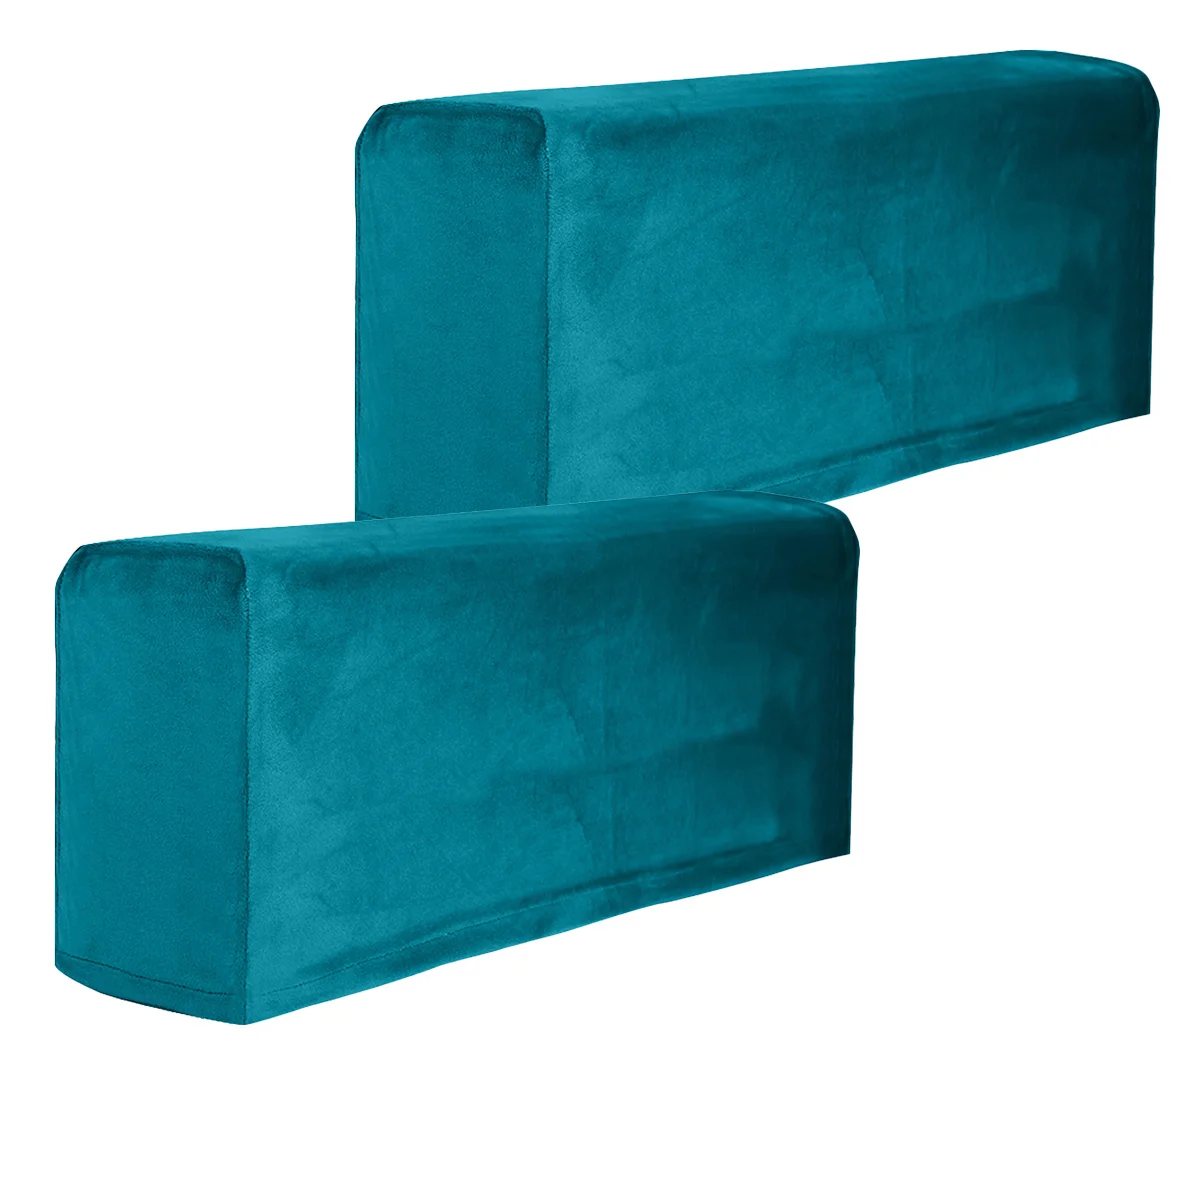 

2 Pcs Arm Rest Chair Armchair Armrest Protector Sofa Towel Sofa Arm Covers Couch Arm Covers Arm Cover Recliners Chairs